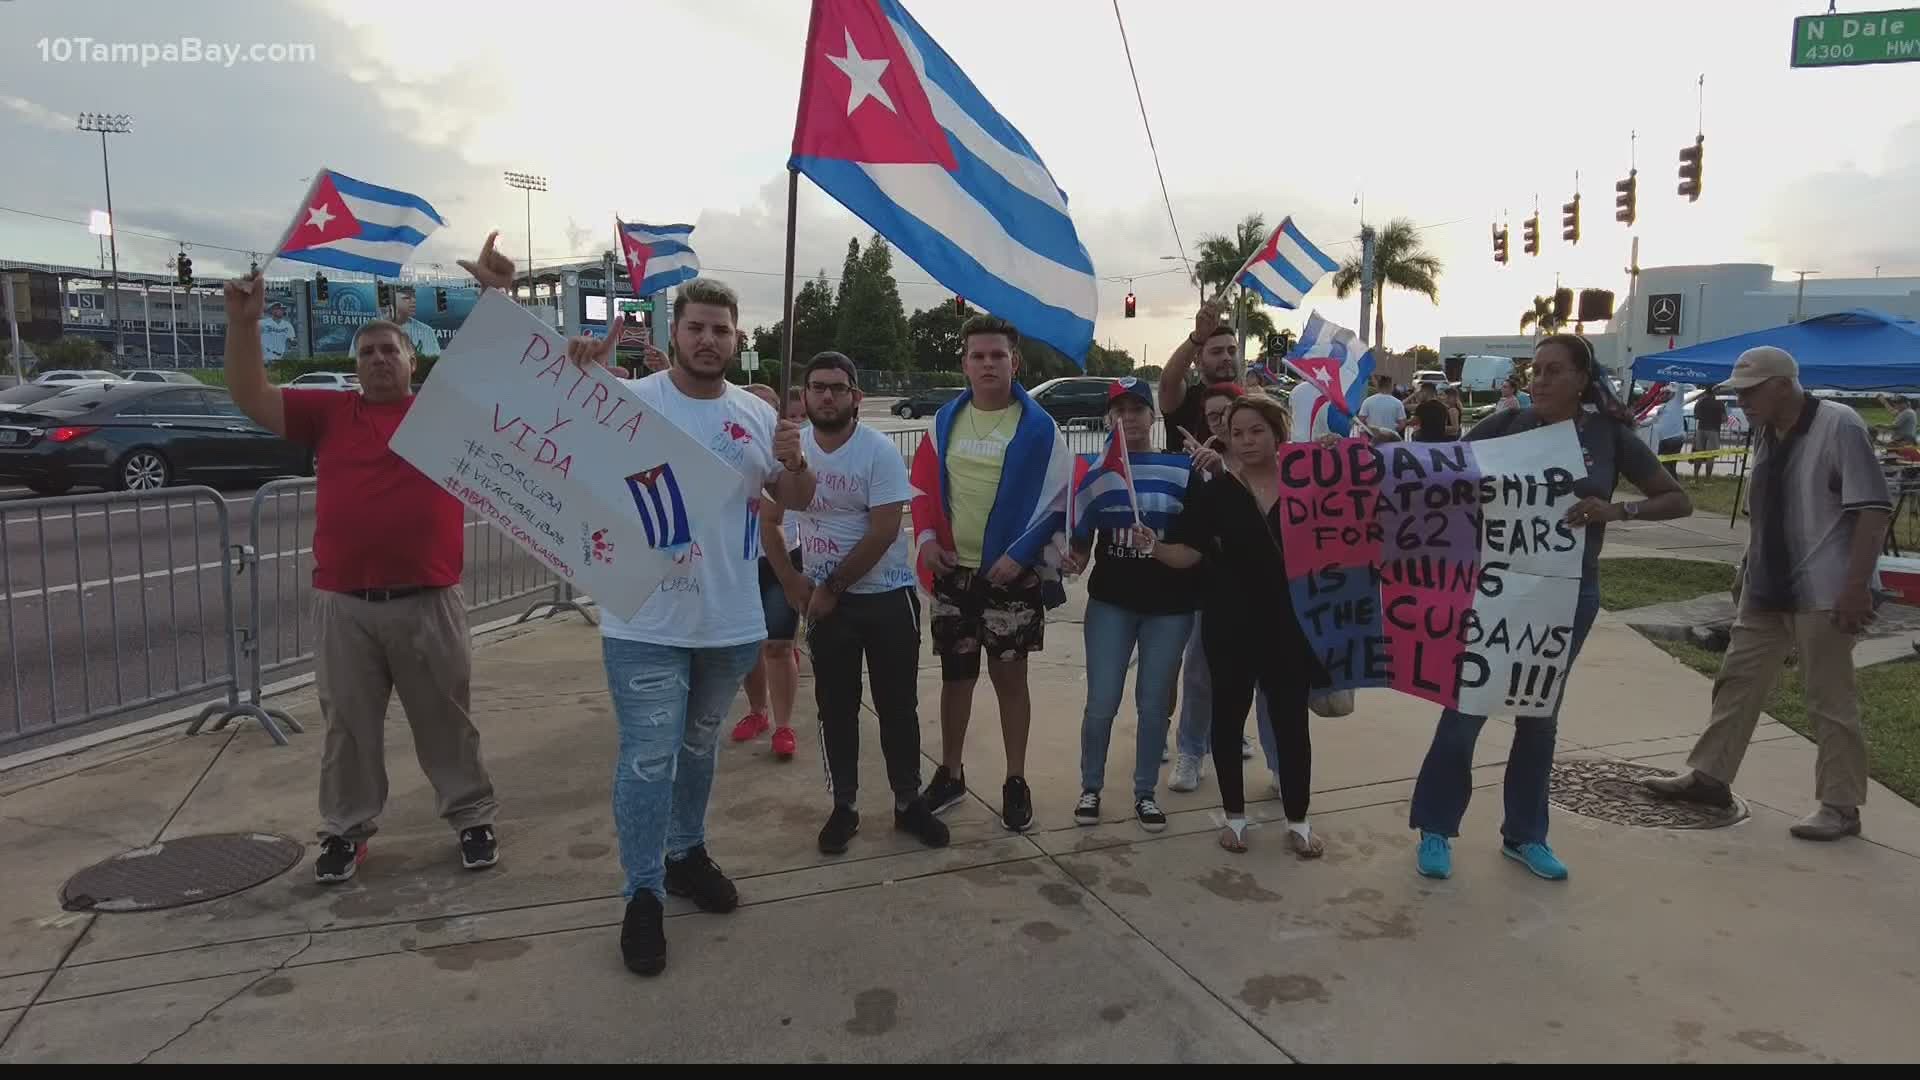 On Friday Cubans from all across Florida planned to take buses to Washington, D.C. and stand with groups from across the country.